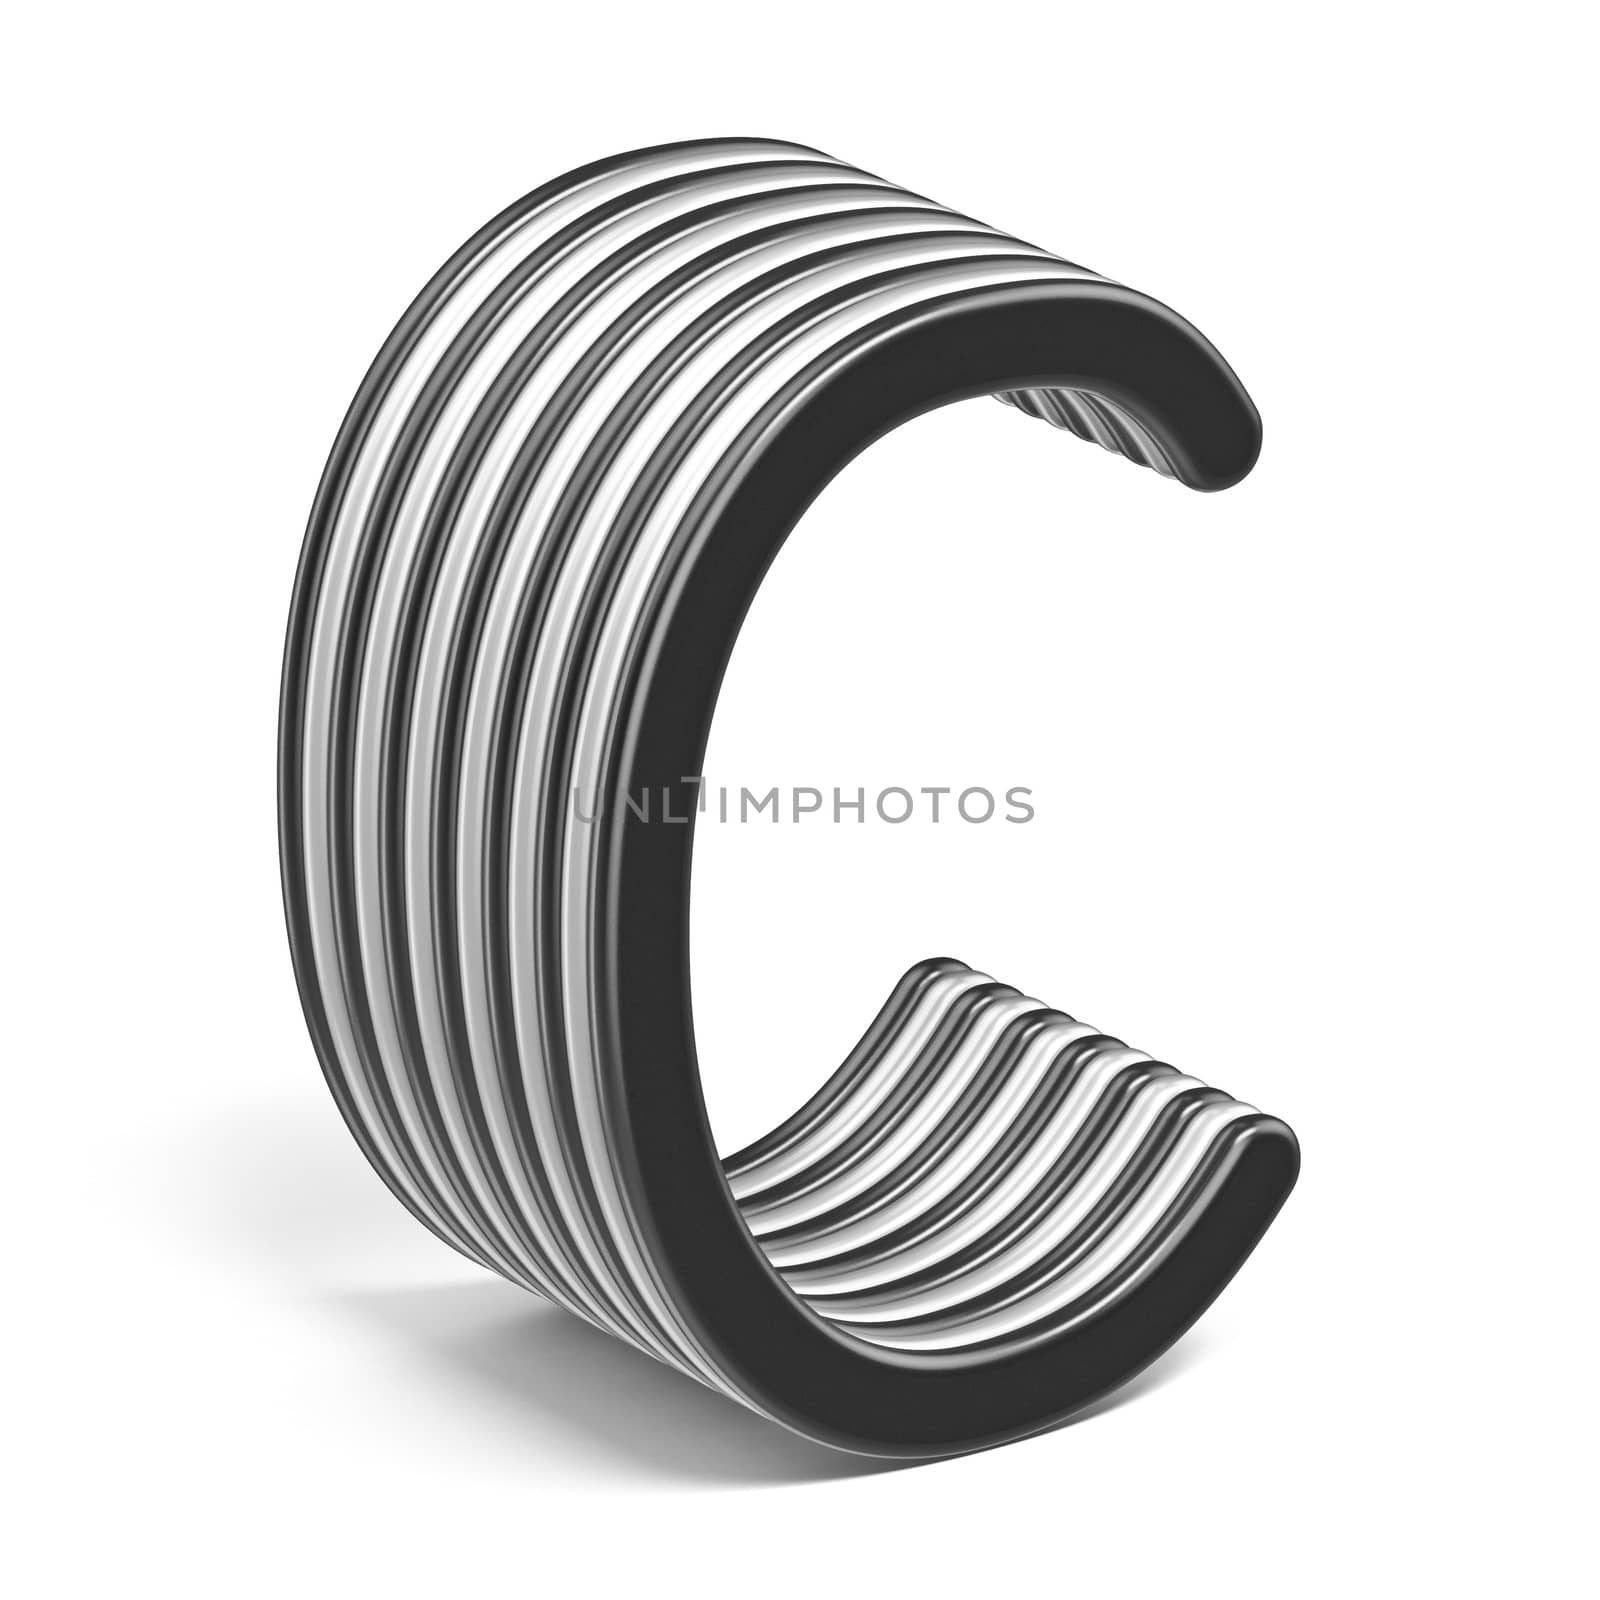 Black and white layered font Letter C 3D render illustration isolated on white background